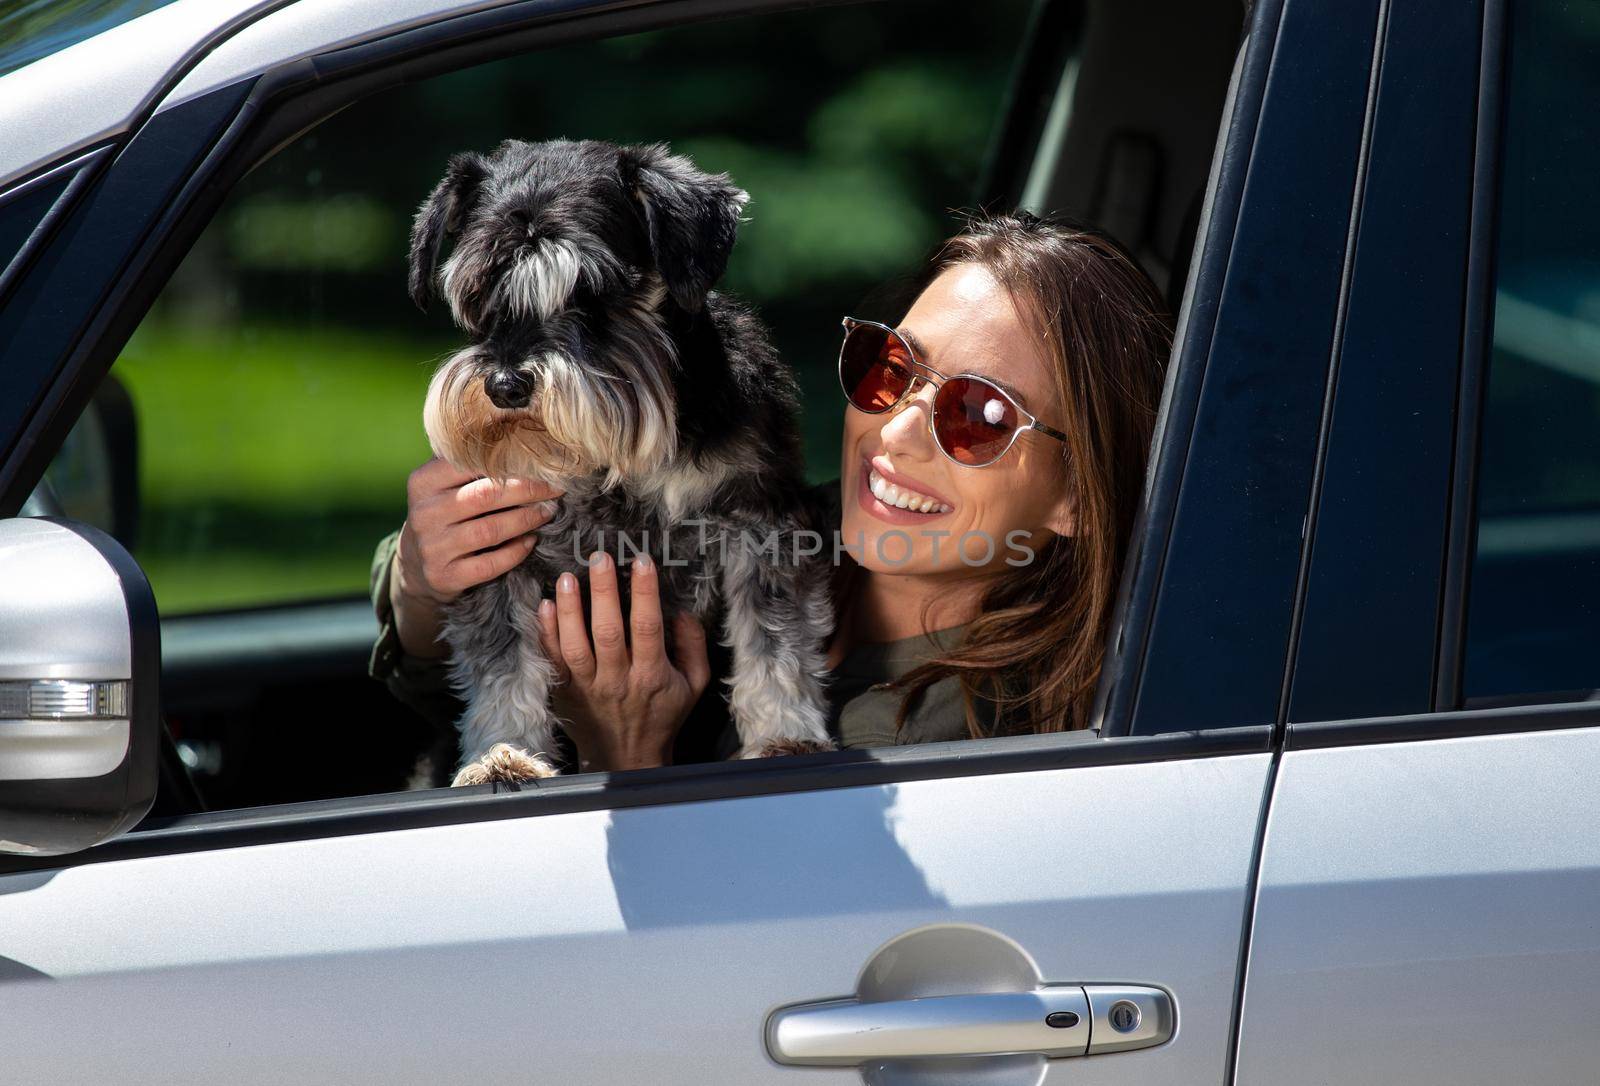 Girl wearing sunglasses sitting in car smiling. Young woman and dog miniature schnauzer looking though window of car.